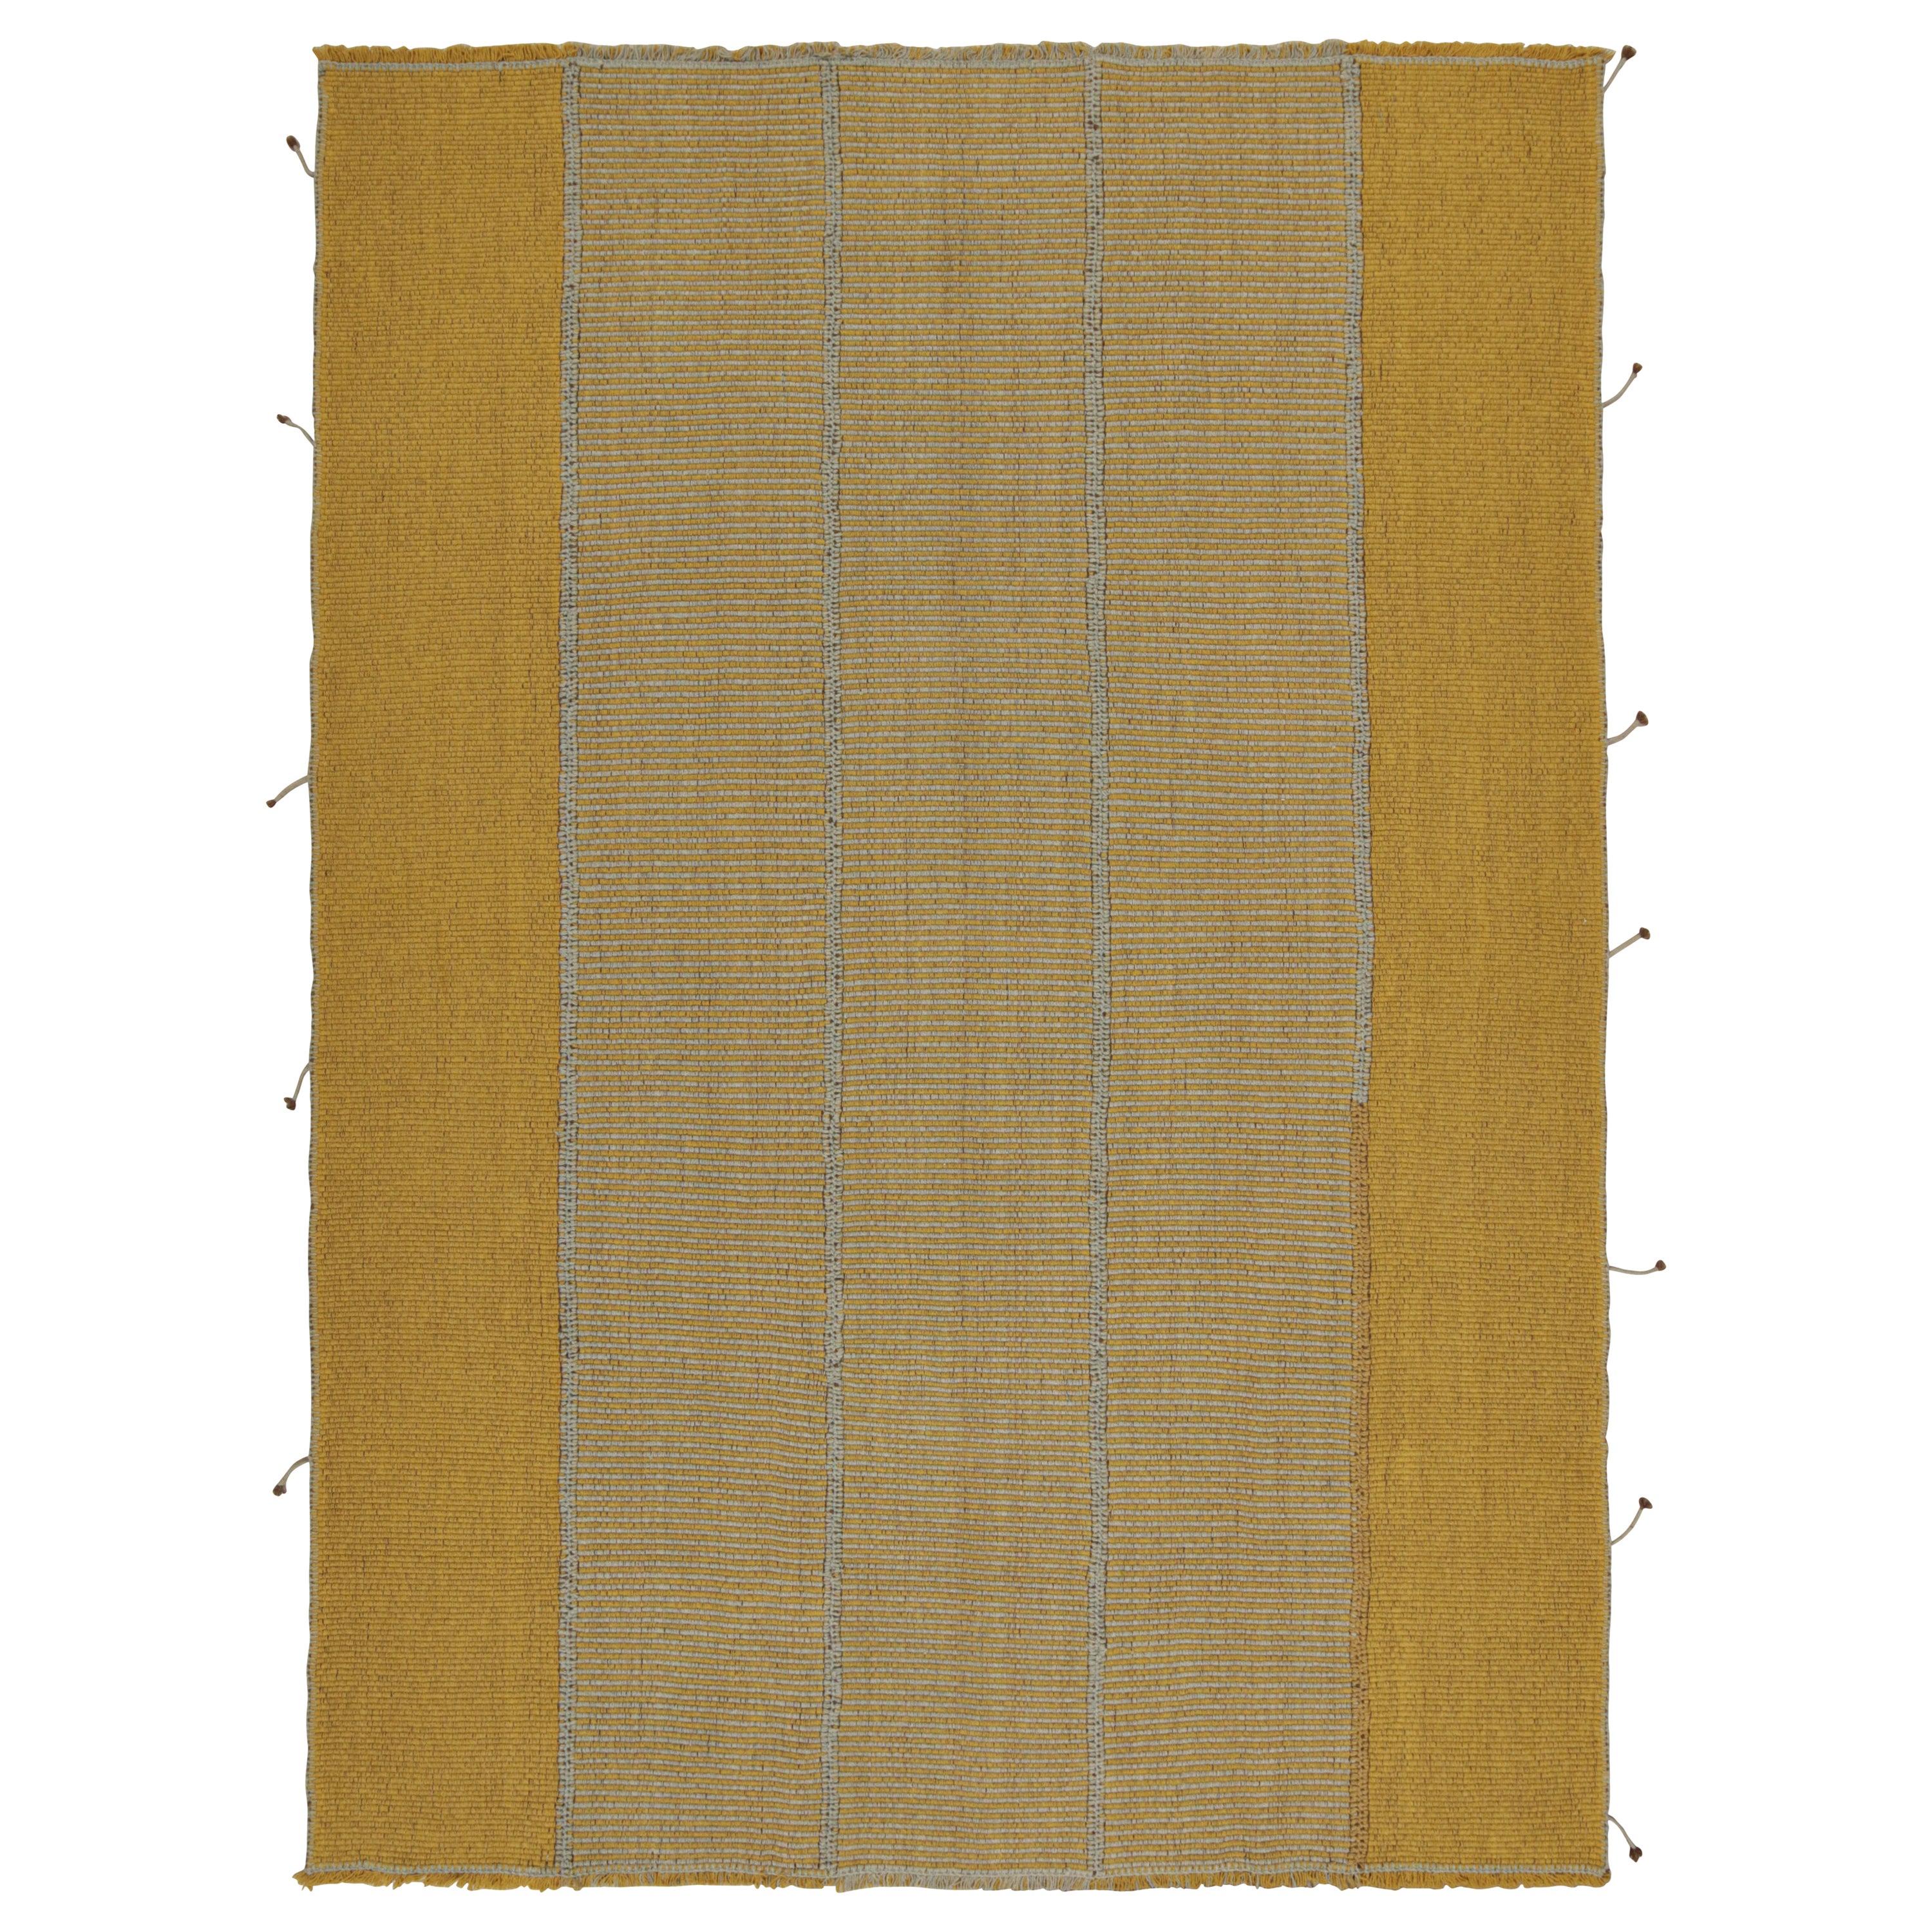 Rug & Kilim’s Contemporary Kilim in Gold and Blue Stripes